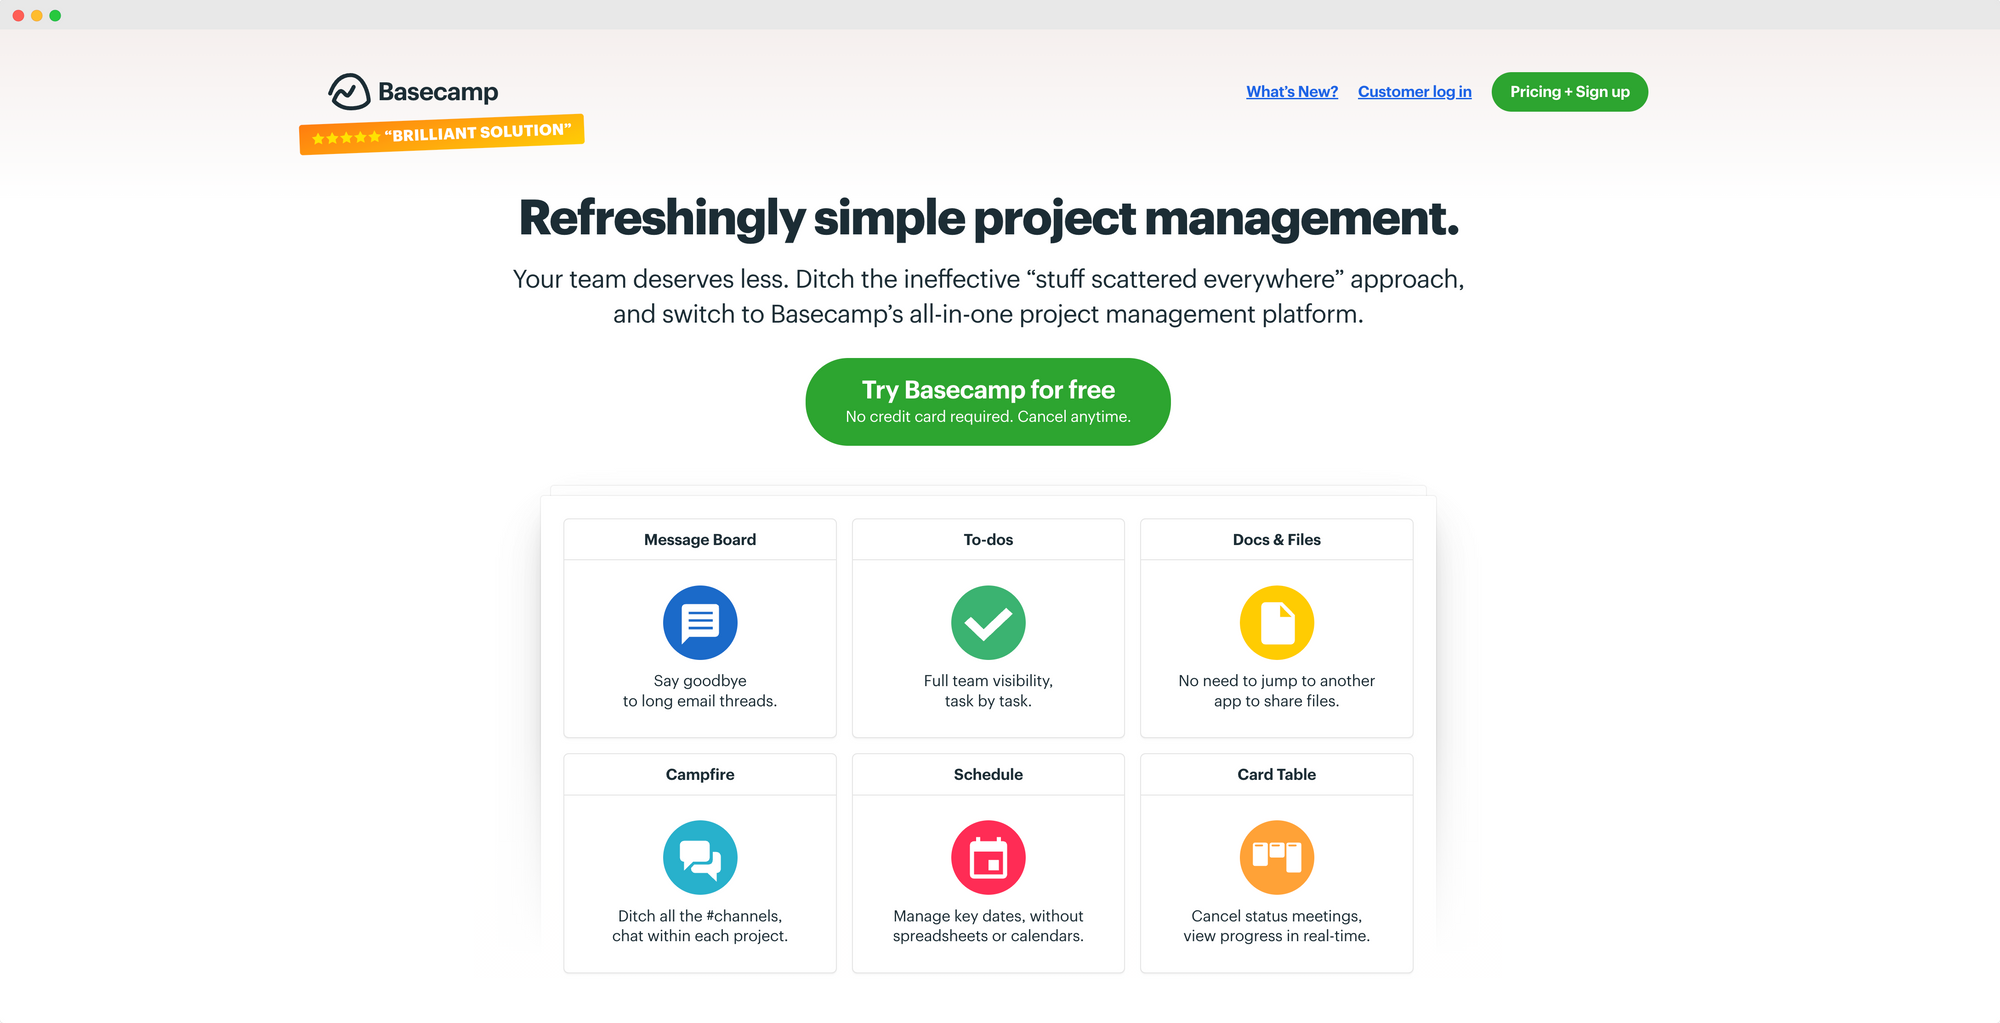  Basecamp's homepage with feature highlights and signup prompt